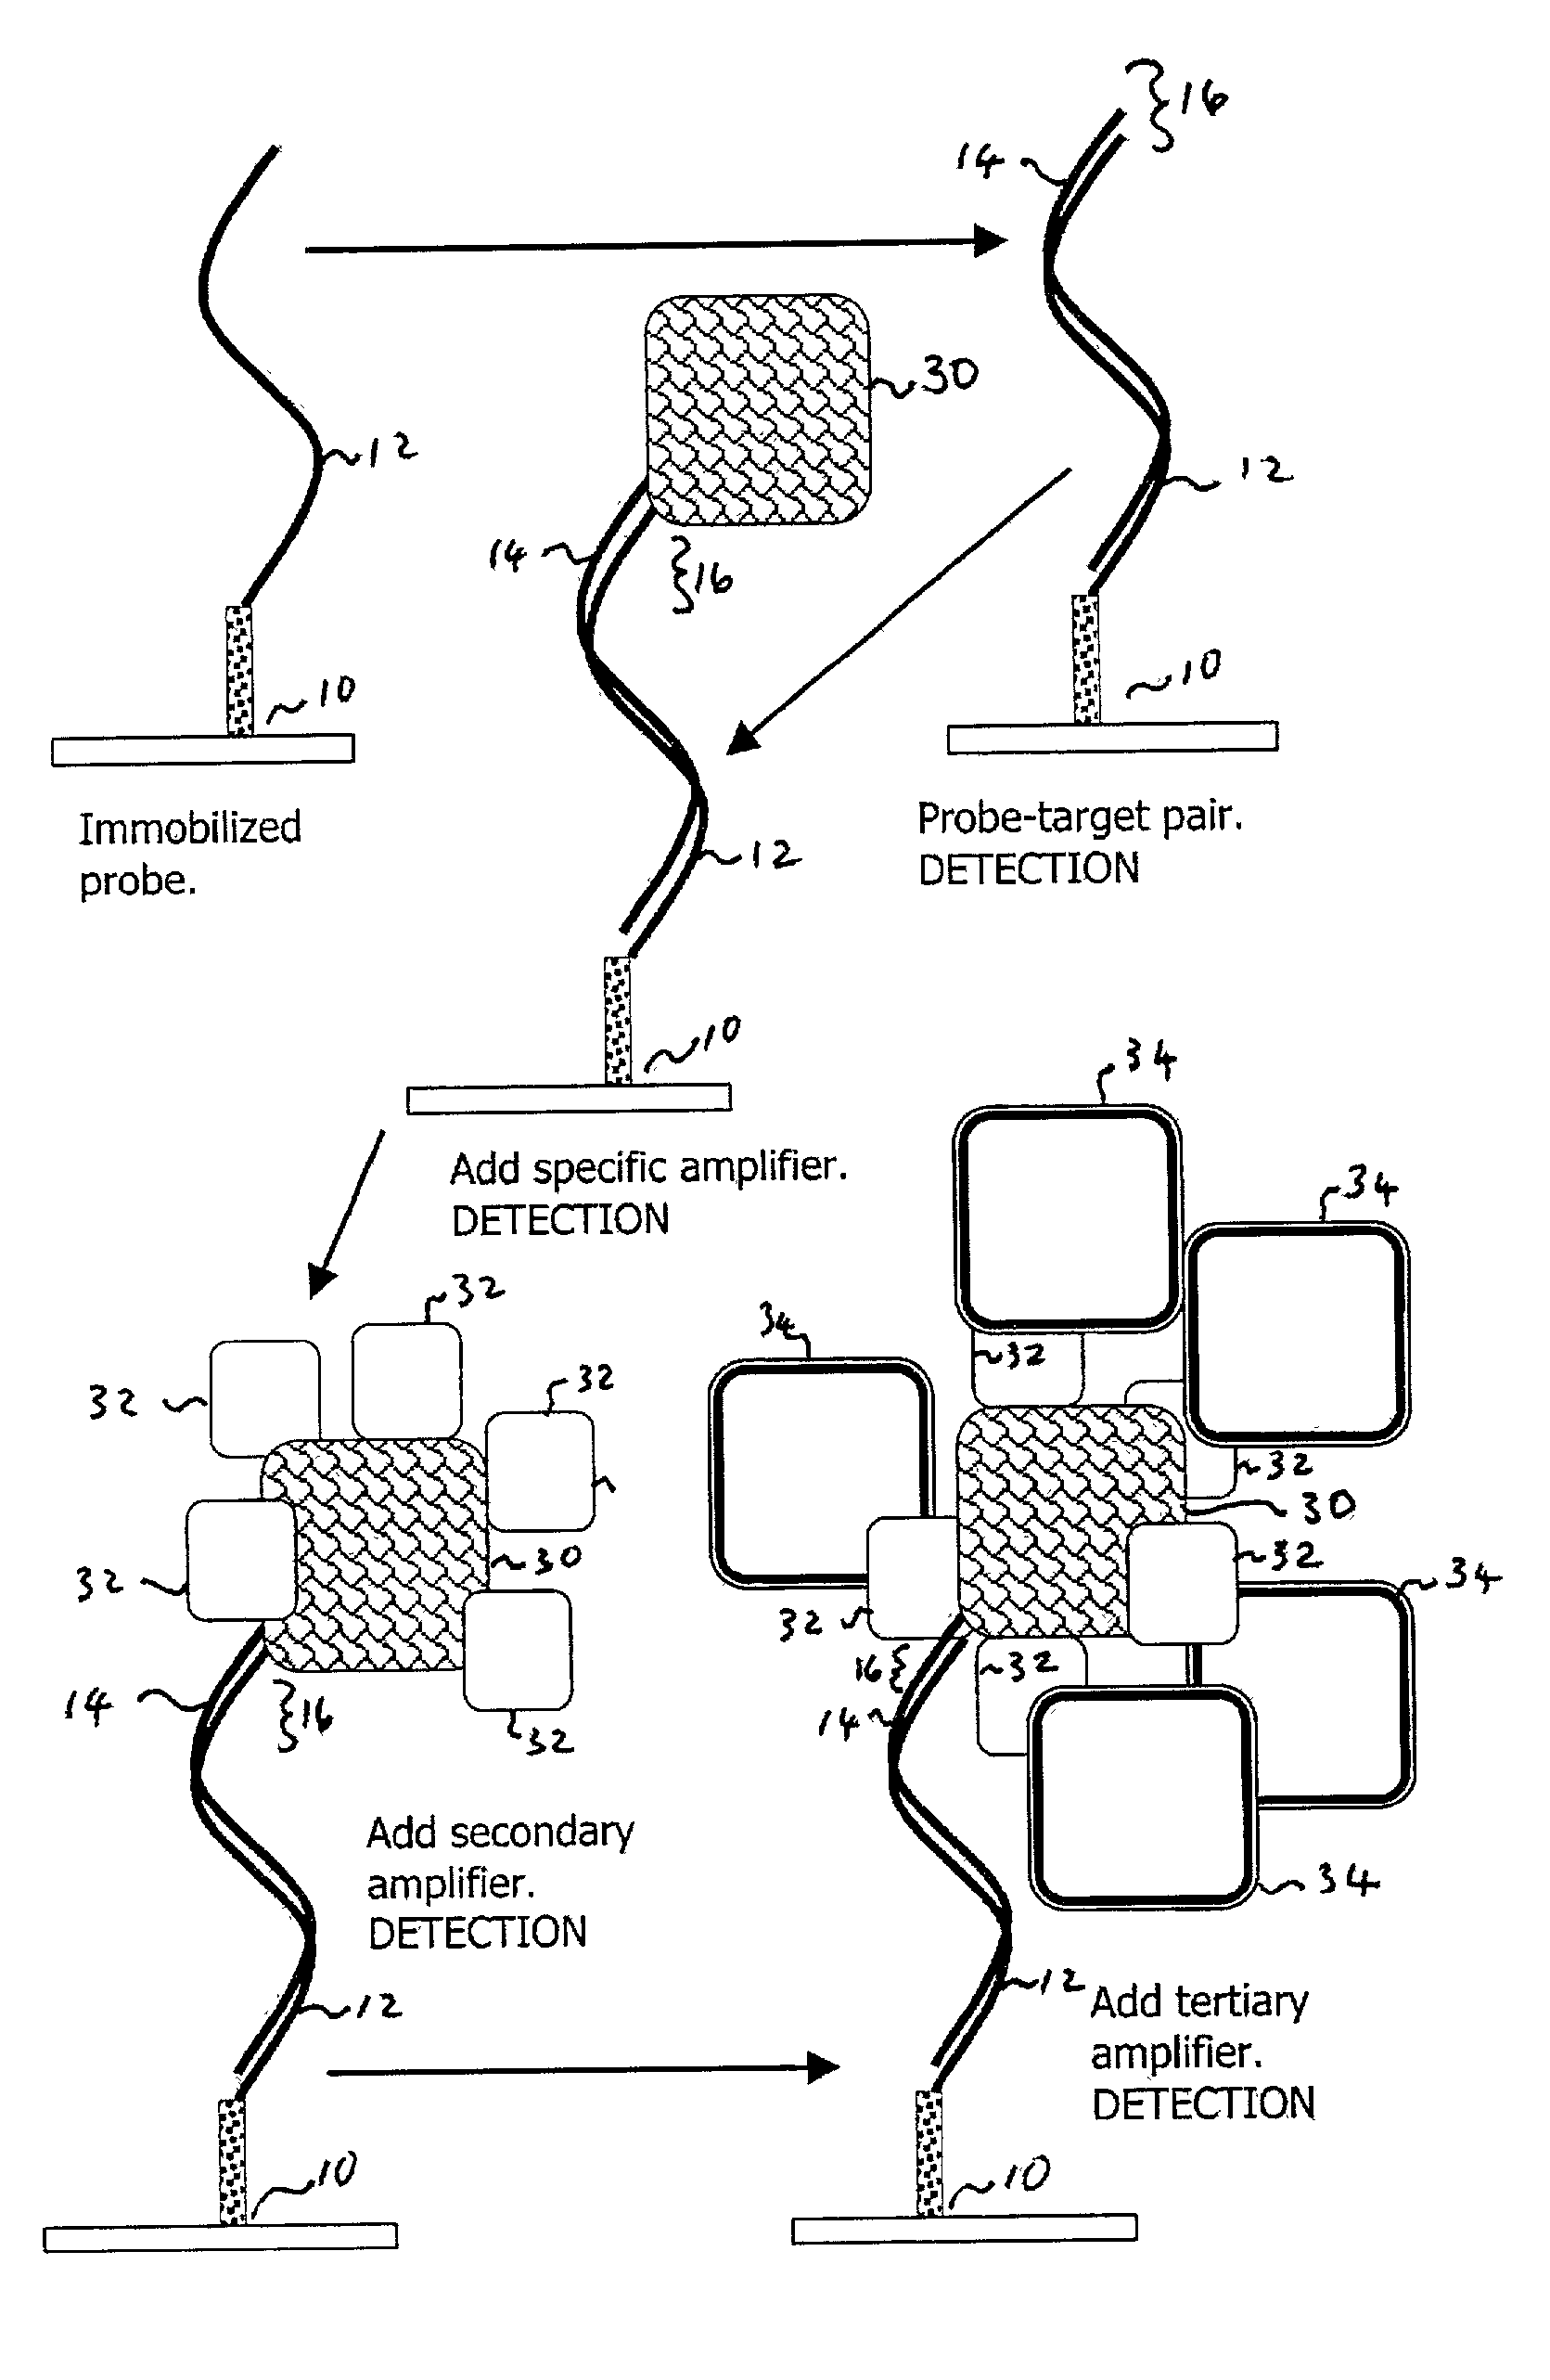 Method and apparatus for recognizing molecular compounds